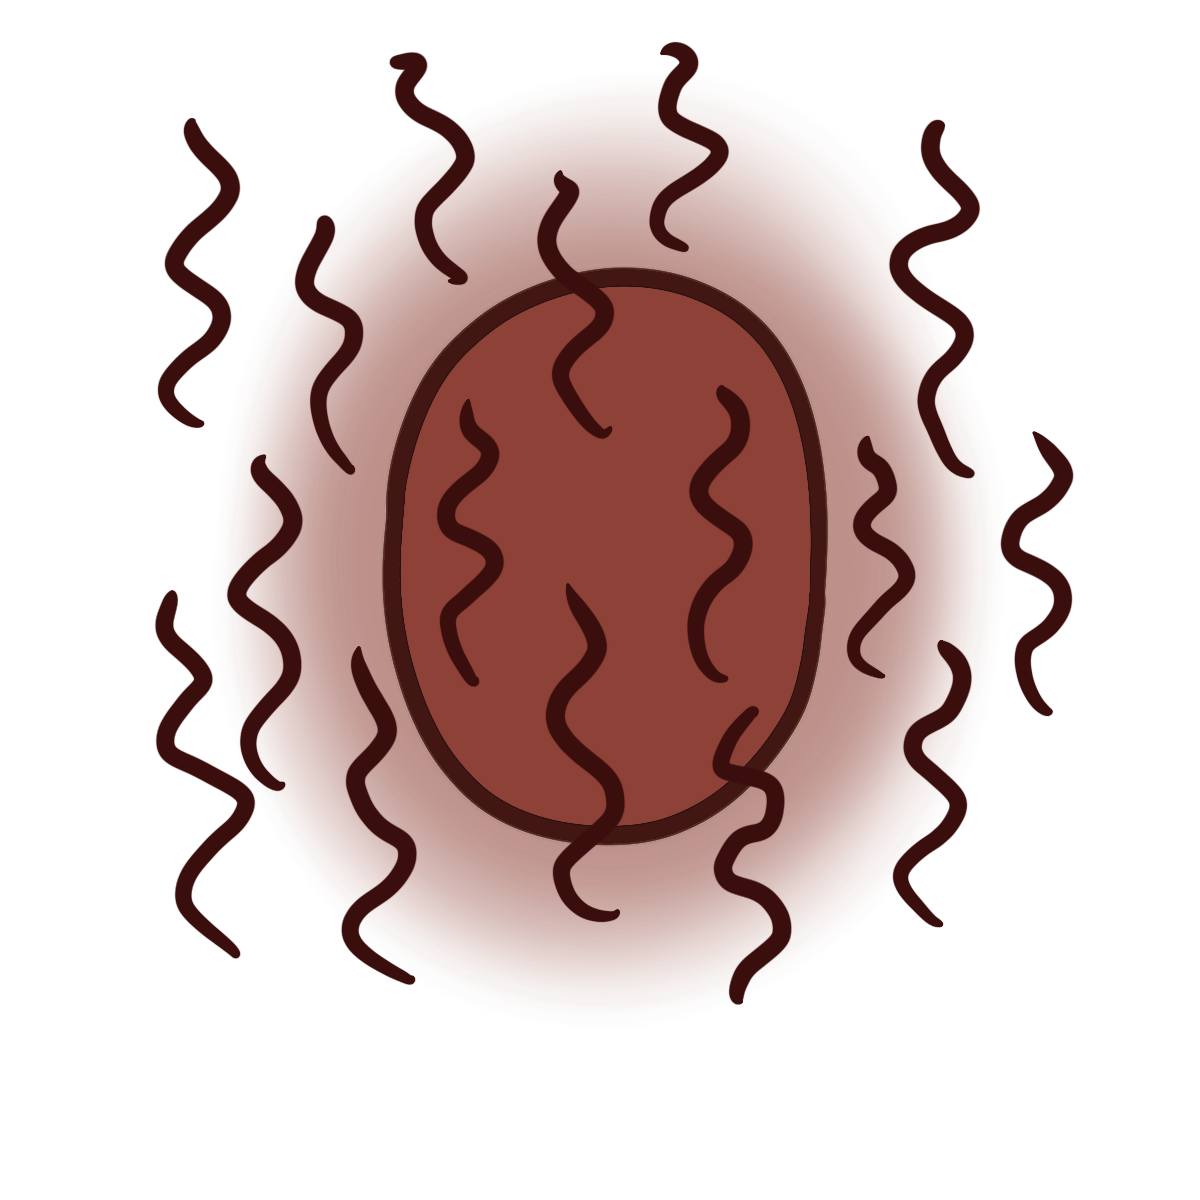 red glowing oval with vertical squiggly dark red lines around it.